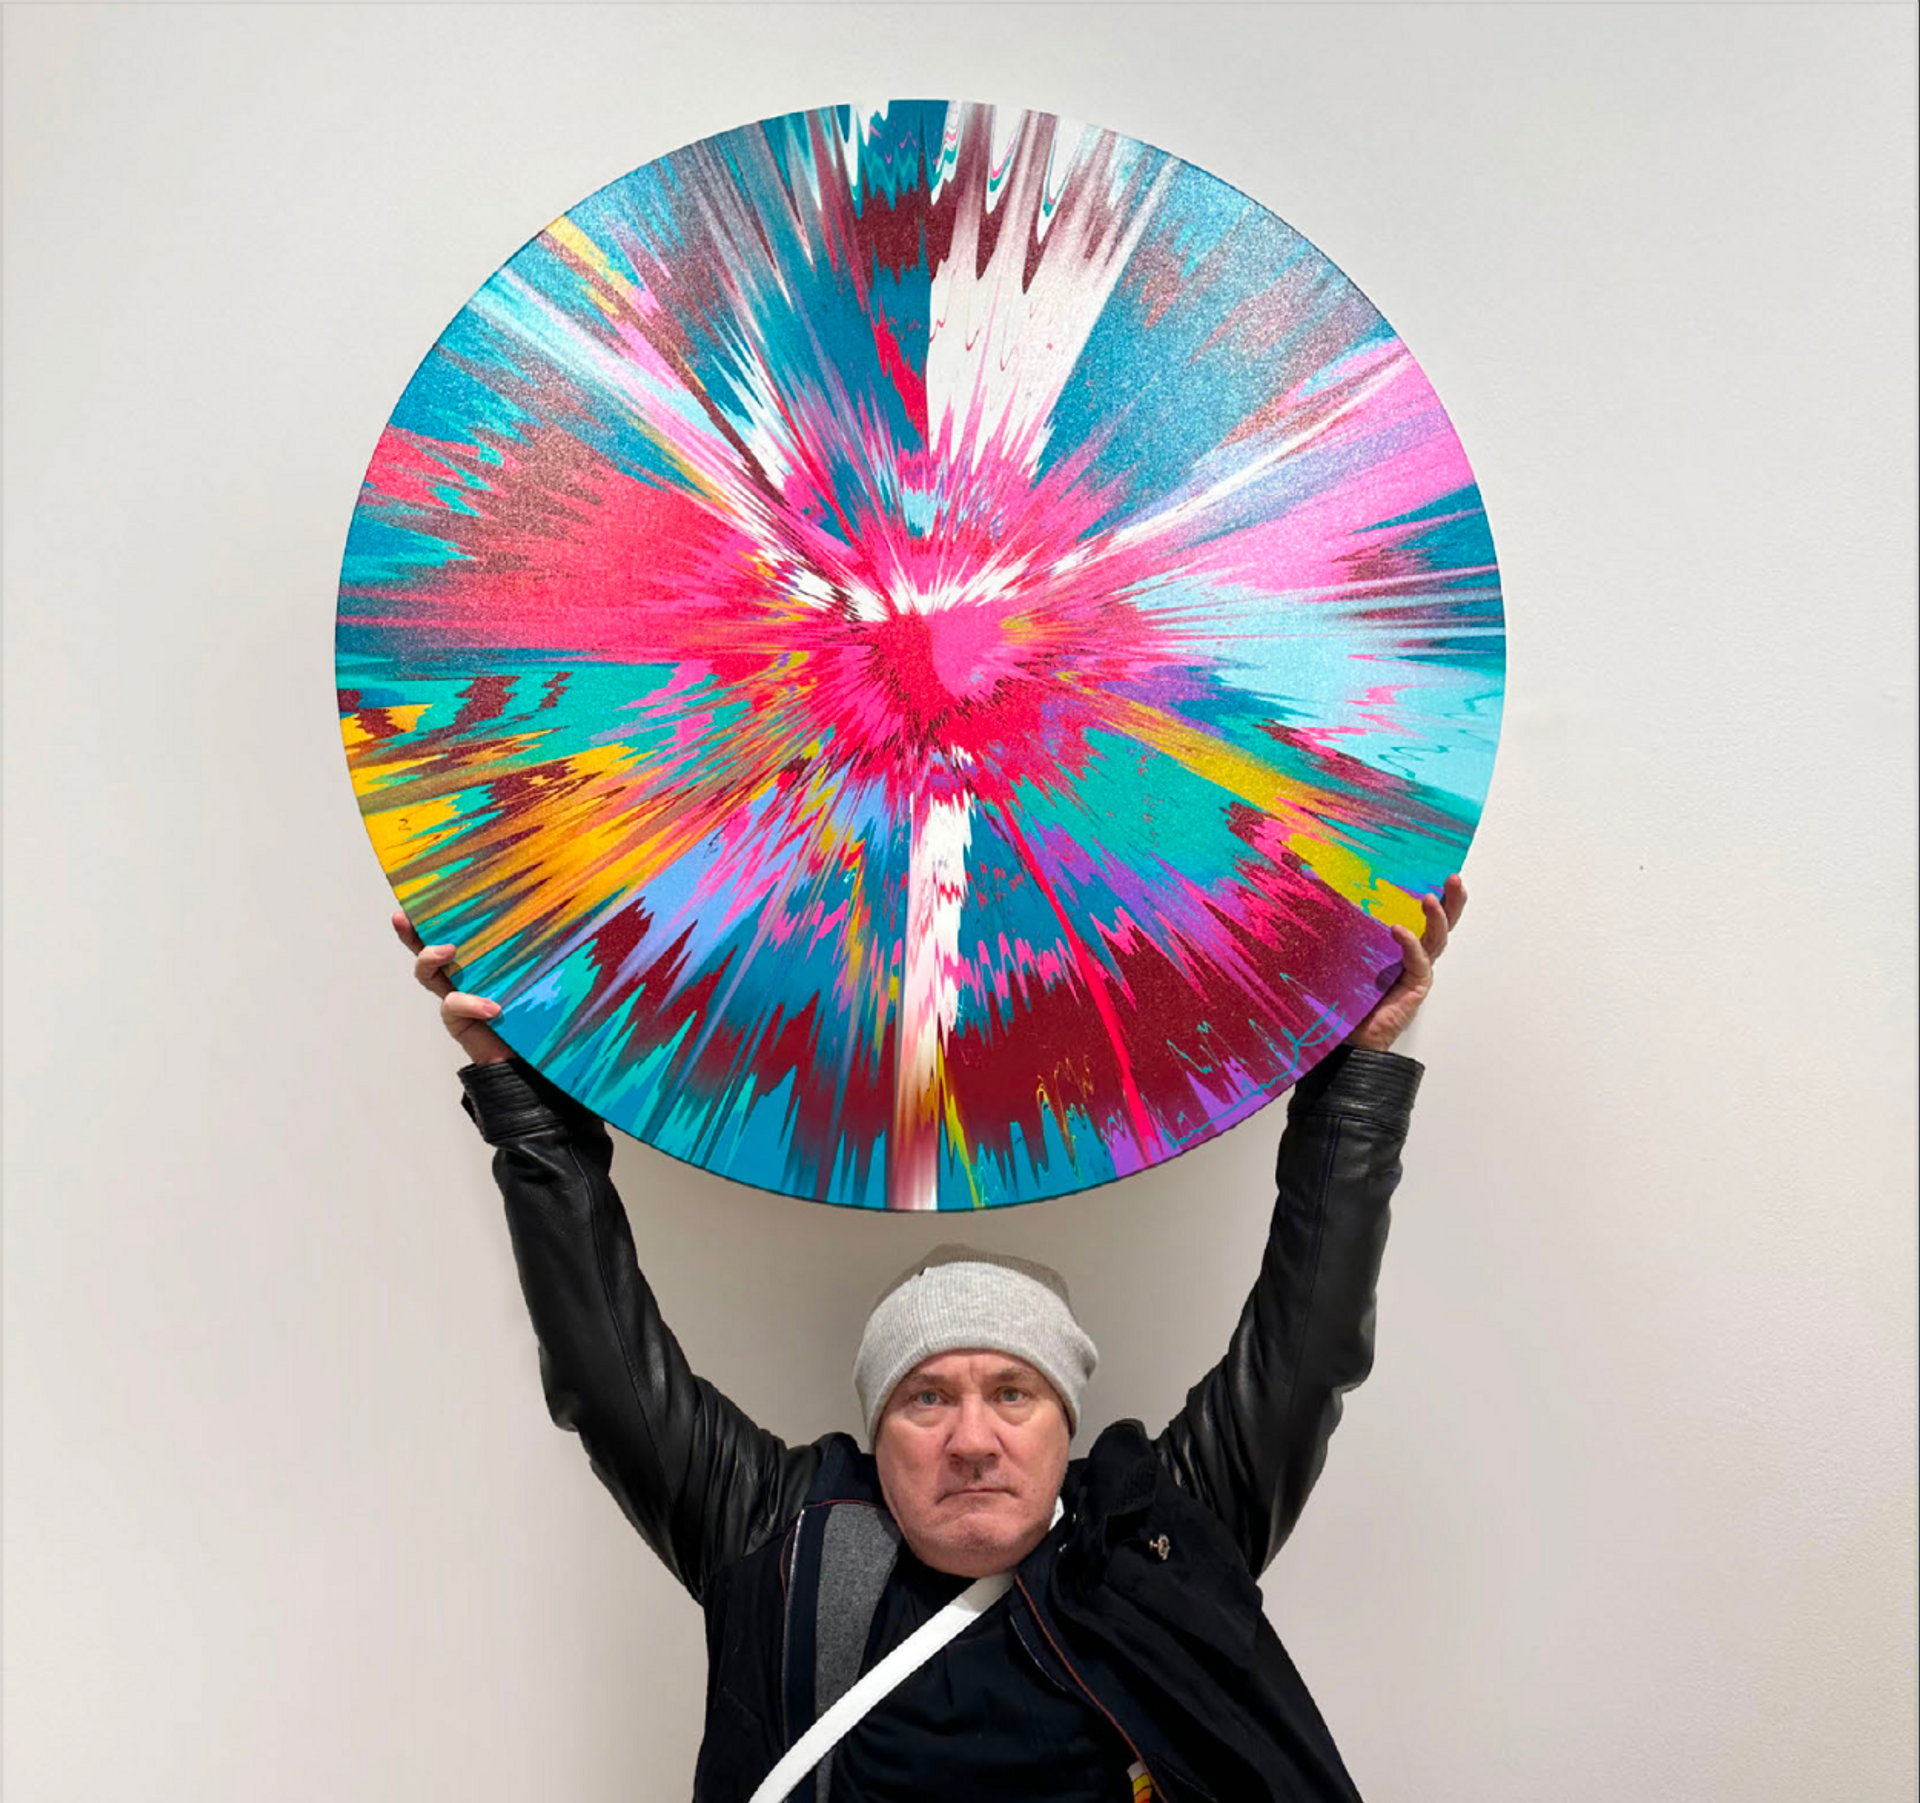 Artist Damien Hirst, dressed in a black leather jacket, holding one of his circular Spin Paintings above his head. The Spin Painting is composed of a varied palette of blues, pinks, reds, yellows, and whites, in a dizzying pattern.